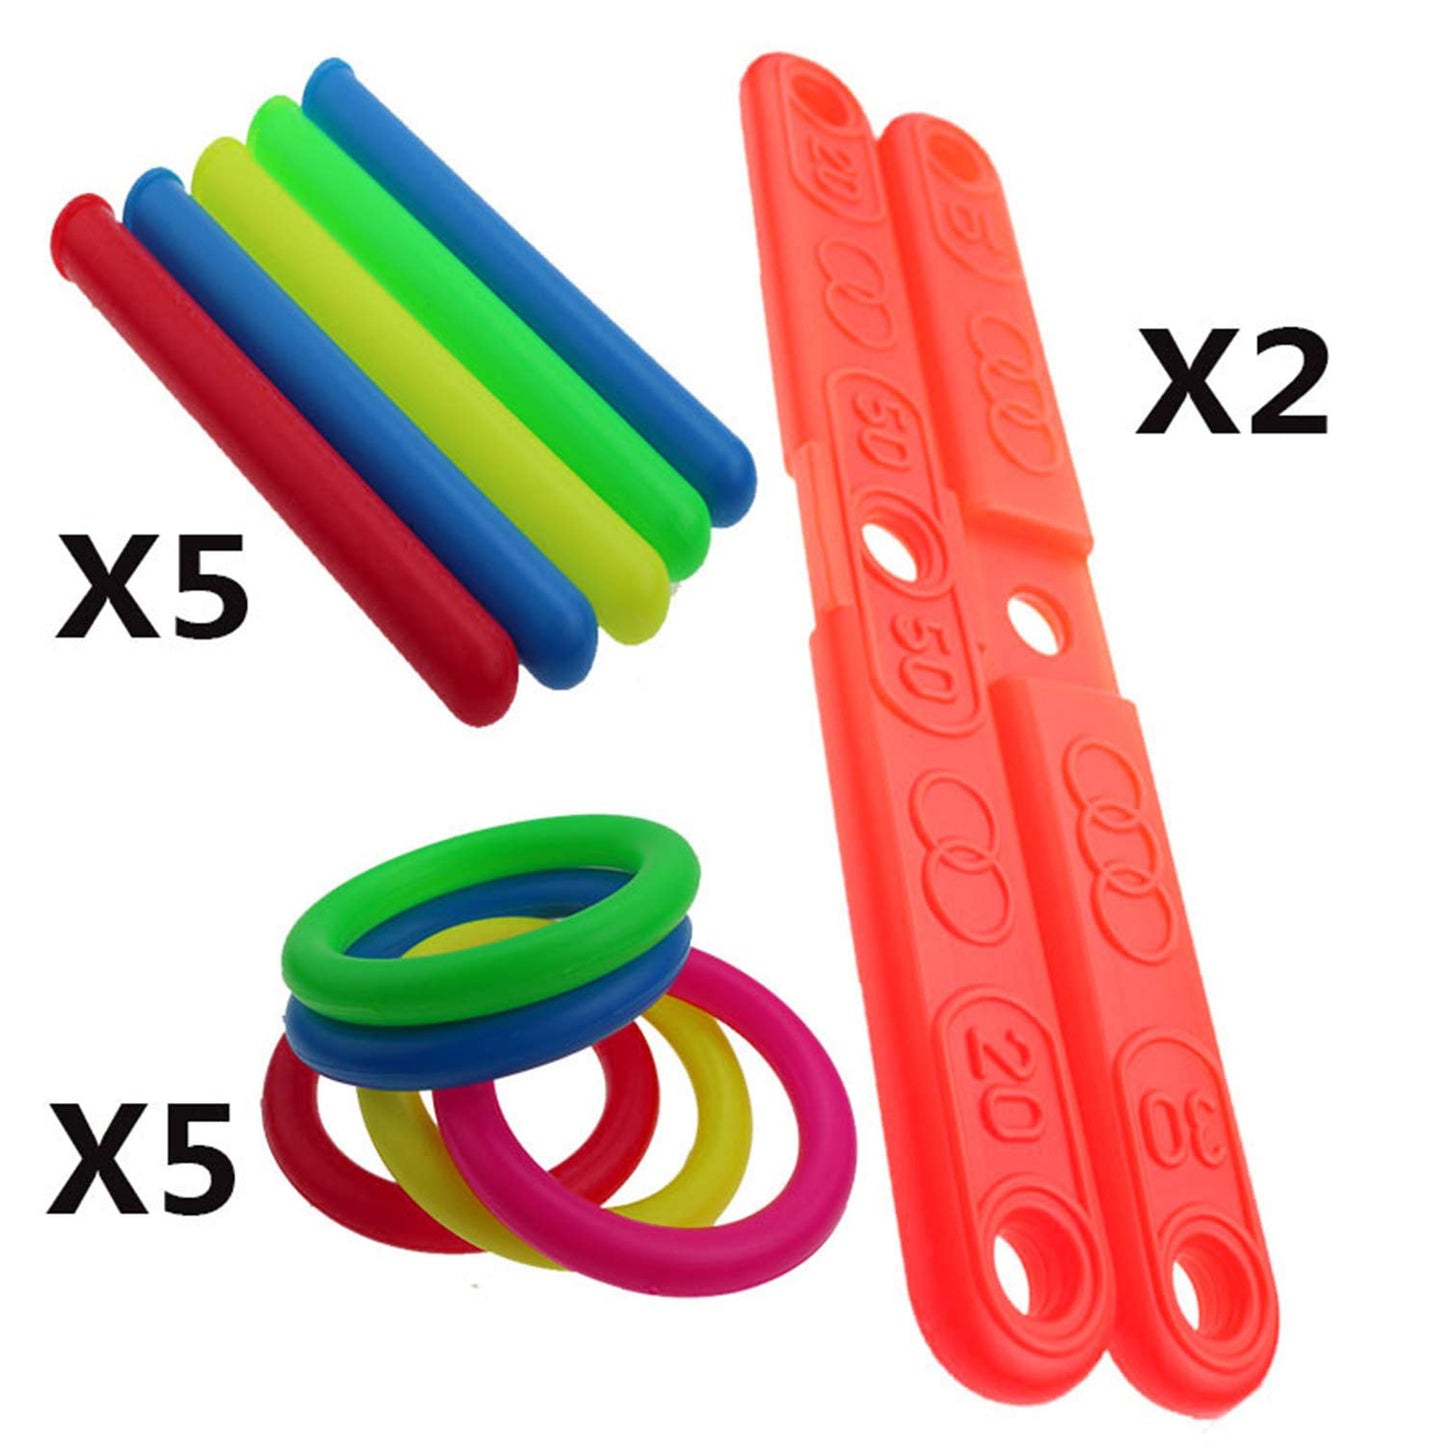 8078 13 Pc Ring Toss Game widely used by children’s and kids for playing and enjoying purposes and all in all kinds of household and official places etc.